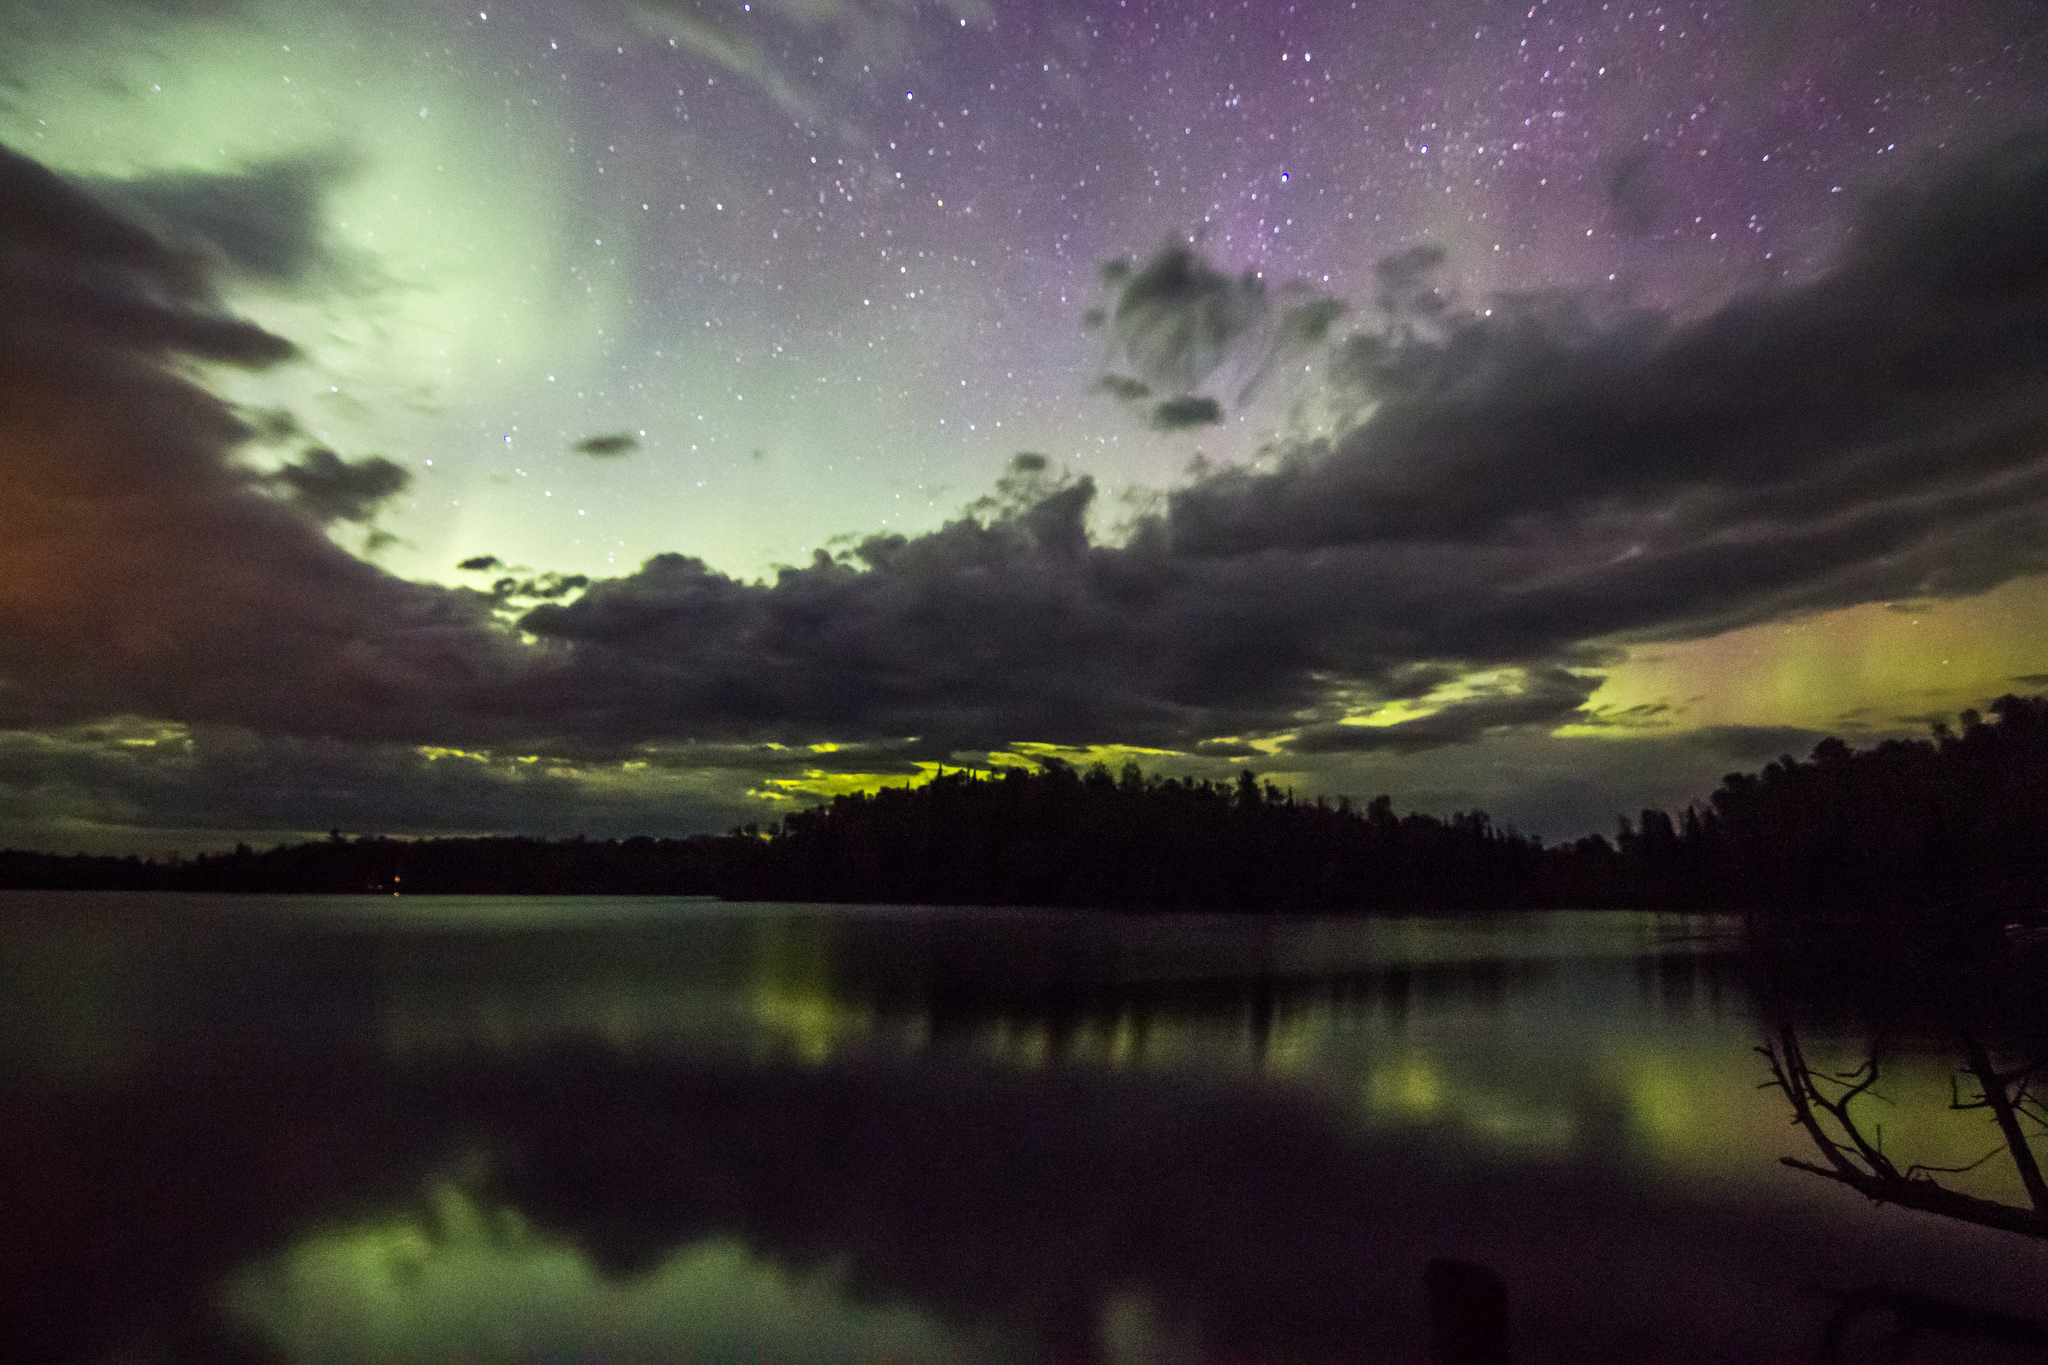 Experts say only far northern Wisconsin has a chance to see the northern lights this week